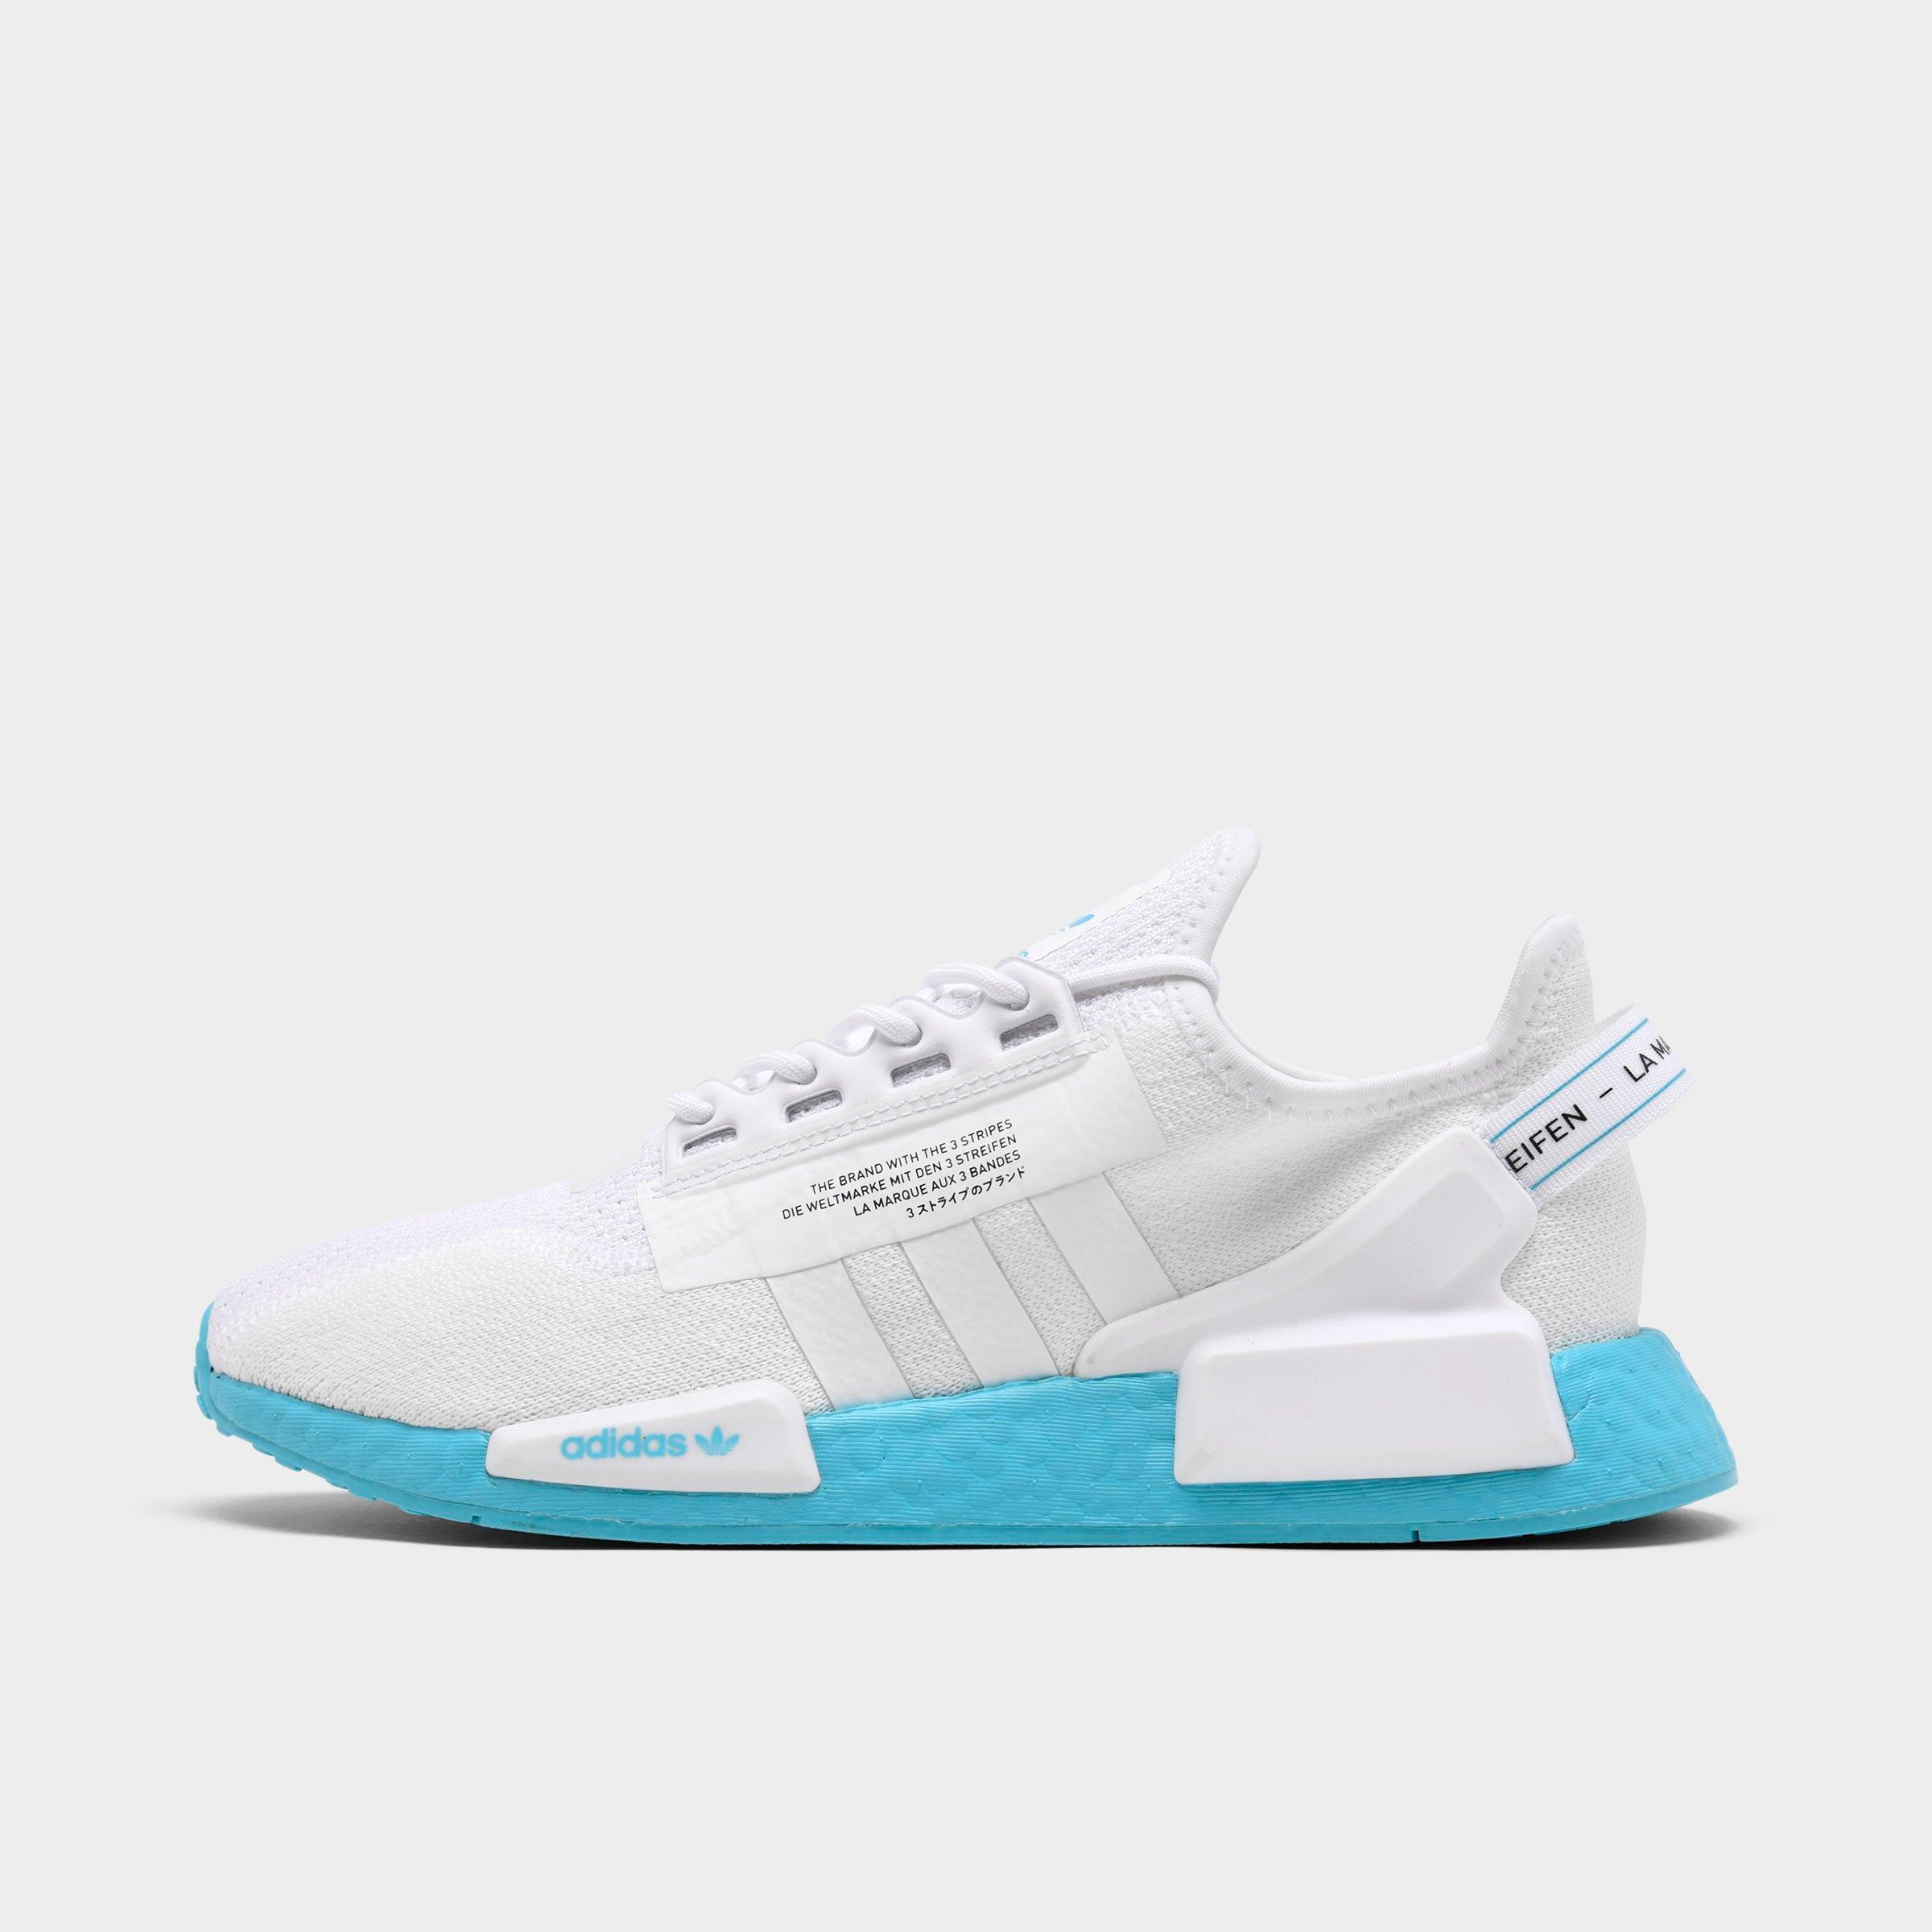 Adidas NMD R1 Womens Shoes Your ID Store Talsit Engineering